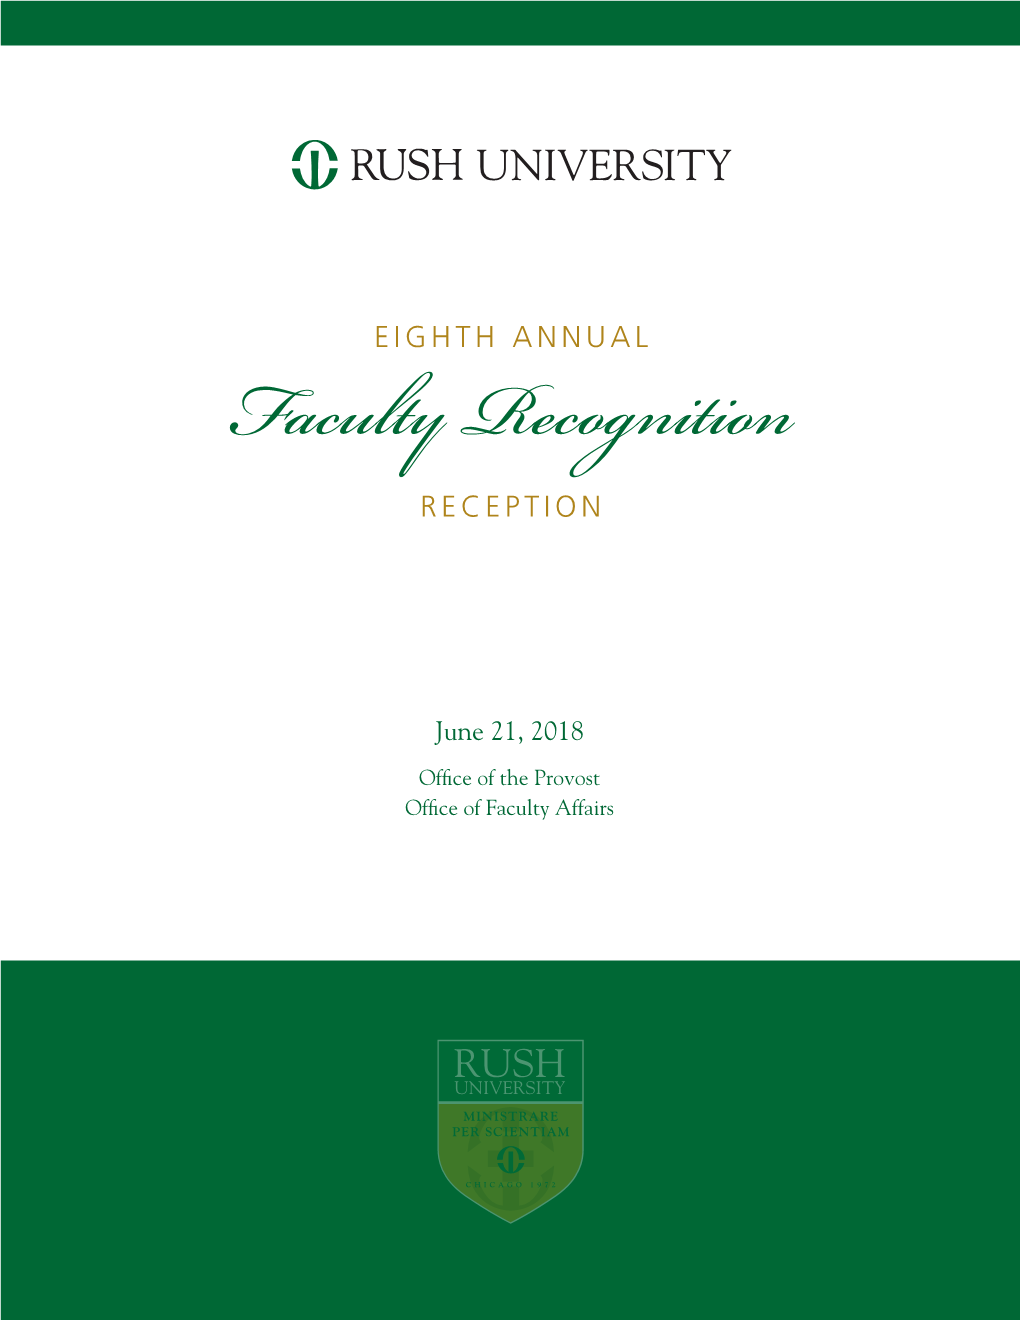 Faculty Recognition RECEPTION